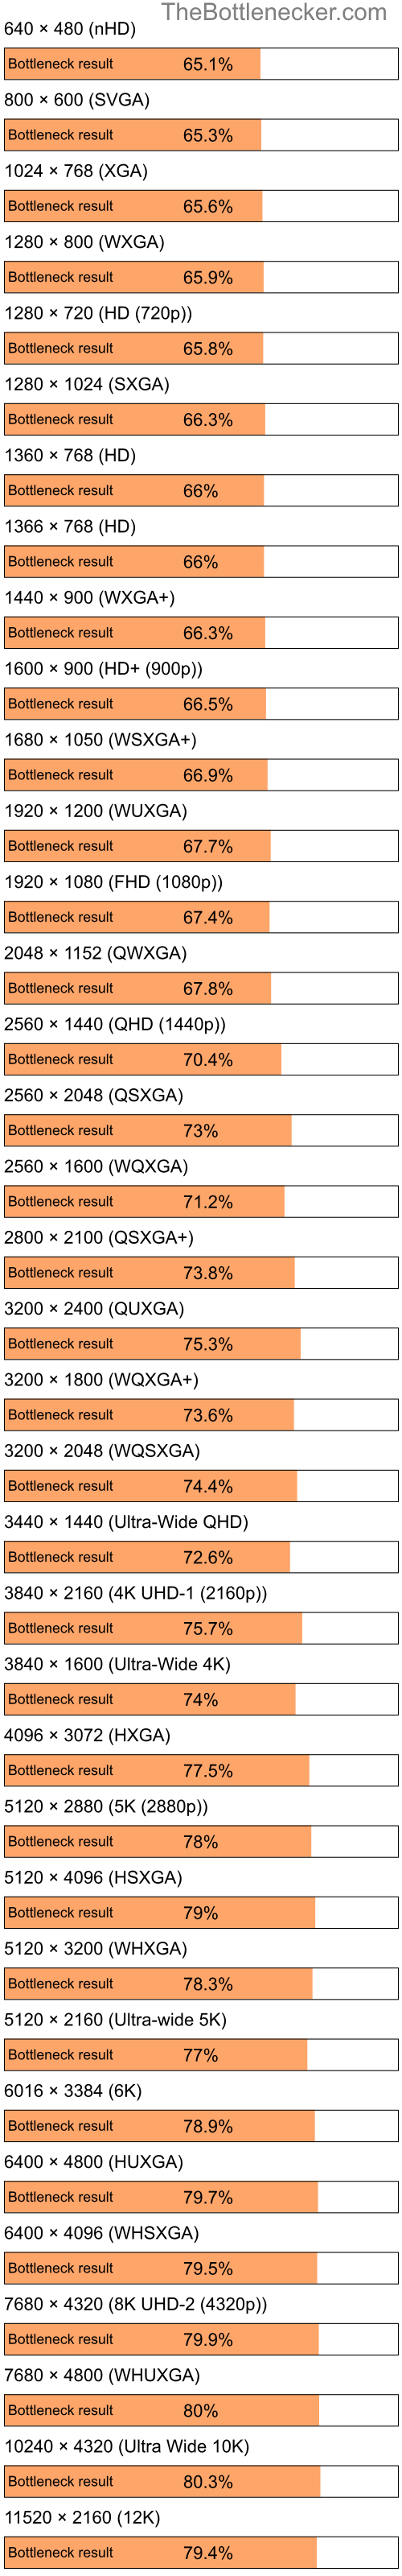 Bottleneck results by resolution for Intel Pentium 4 and NVIDIA GeForce Go 7300 in Processor Intense Tasks